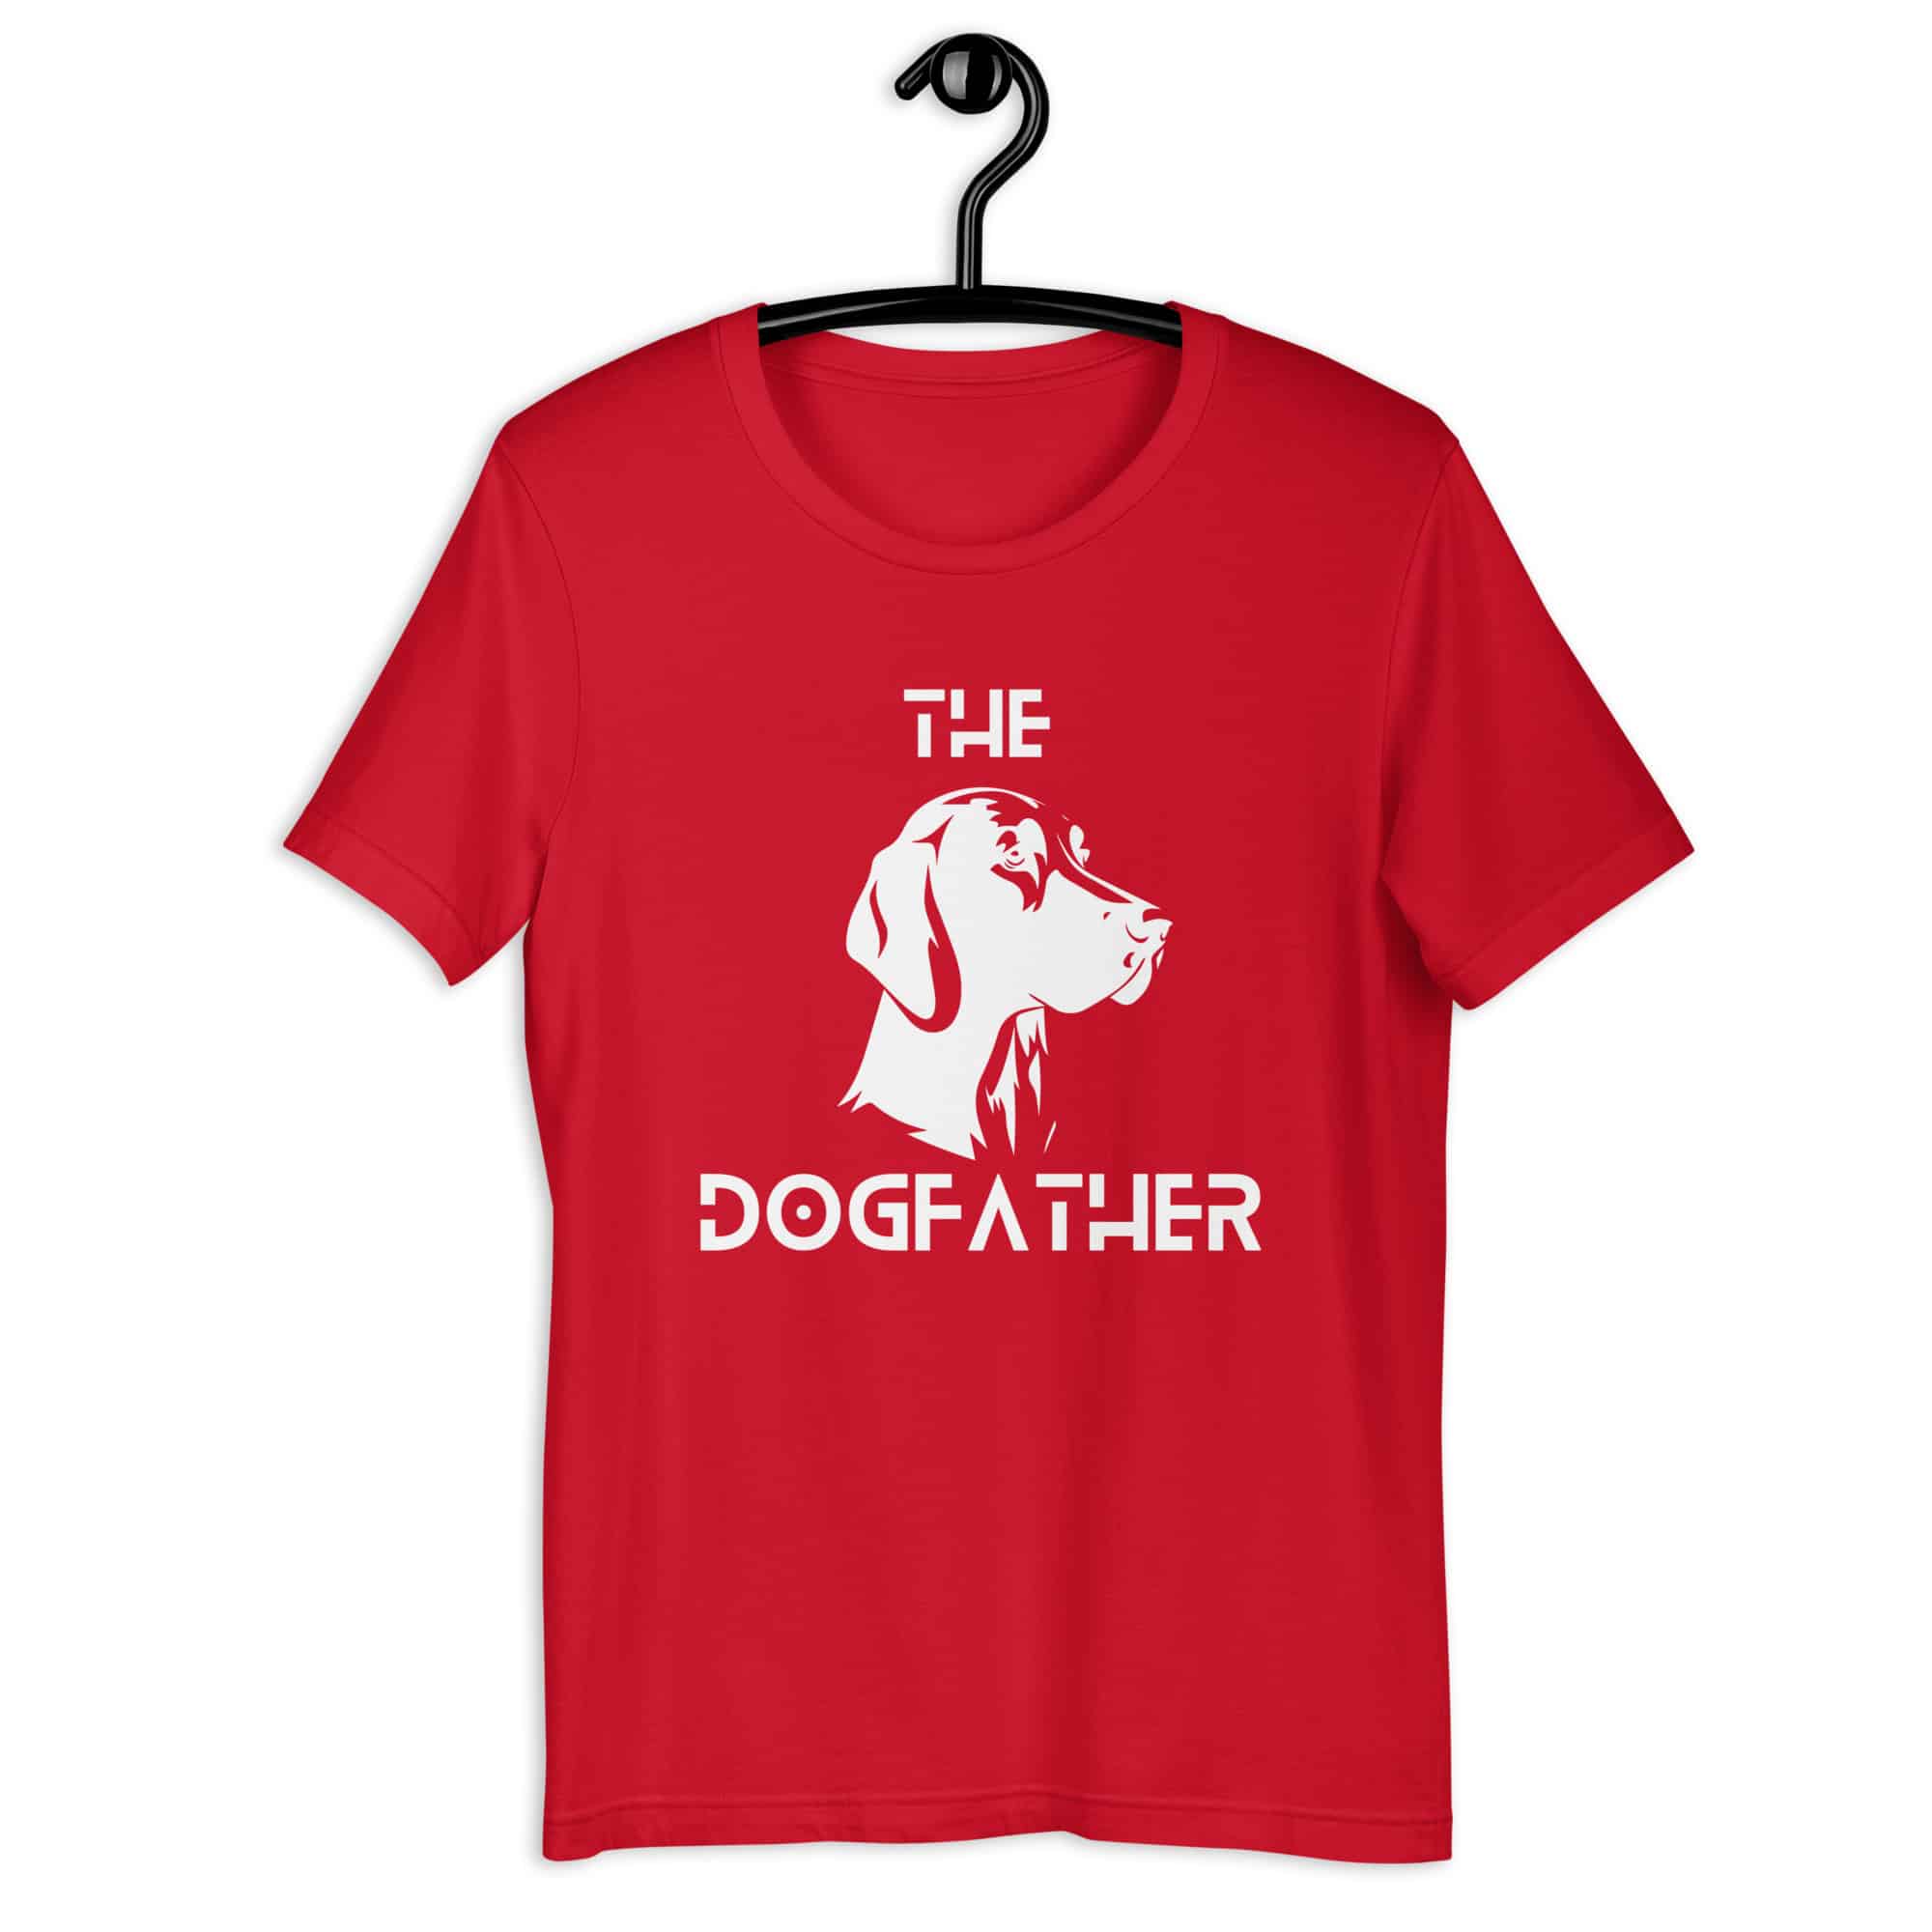 The Dogfather Retrievers Unisex T-Shirt. Red